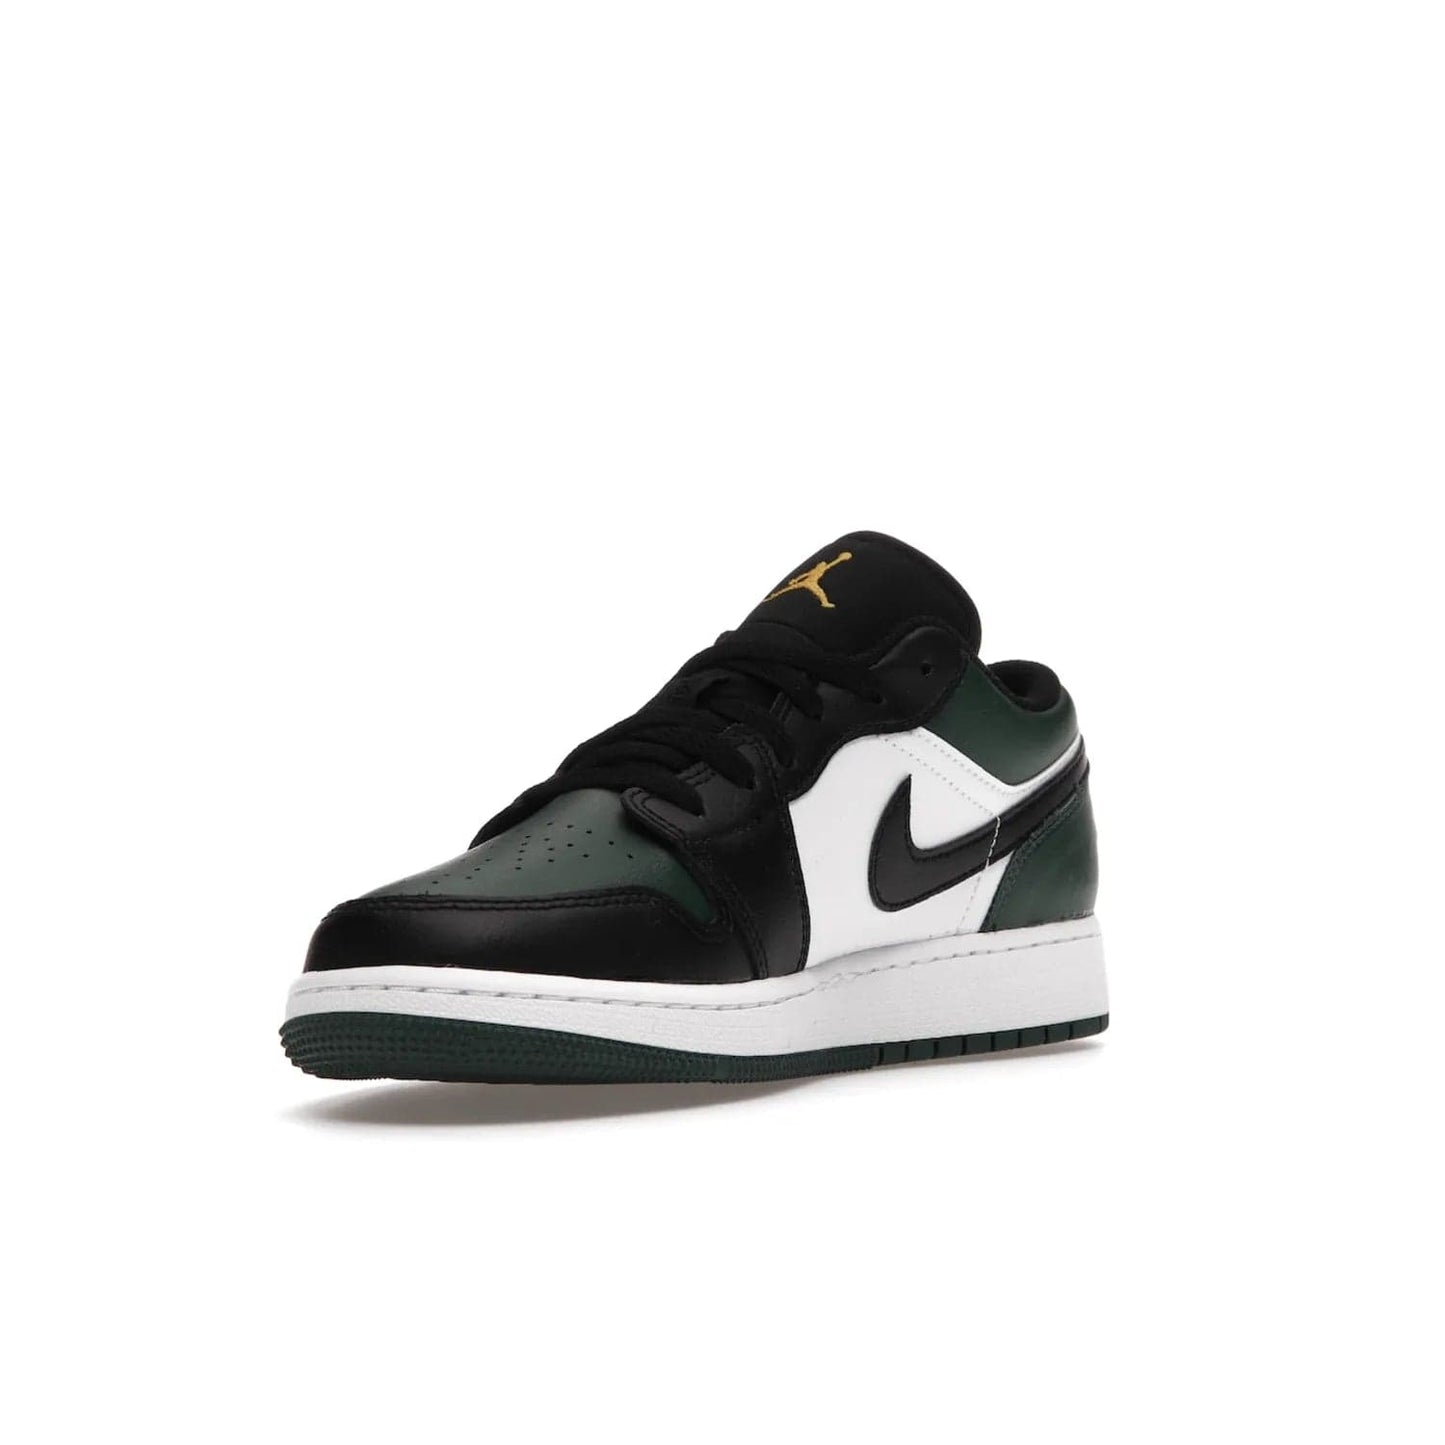 Jordan 1 Low Green Toe (GS) - Image 14 - Only at www.BallersClubKickz.com - Get the perfect low cut Jordans. Shop the Air Jordan 1 Low Noble Green GS shoes with its unique colorway and stencil Jumpman logo. Available October 2021.